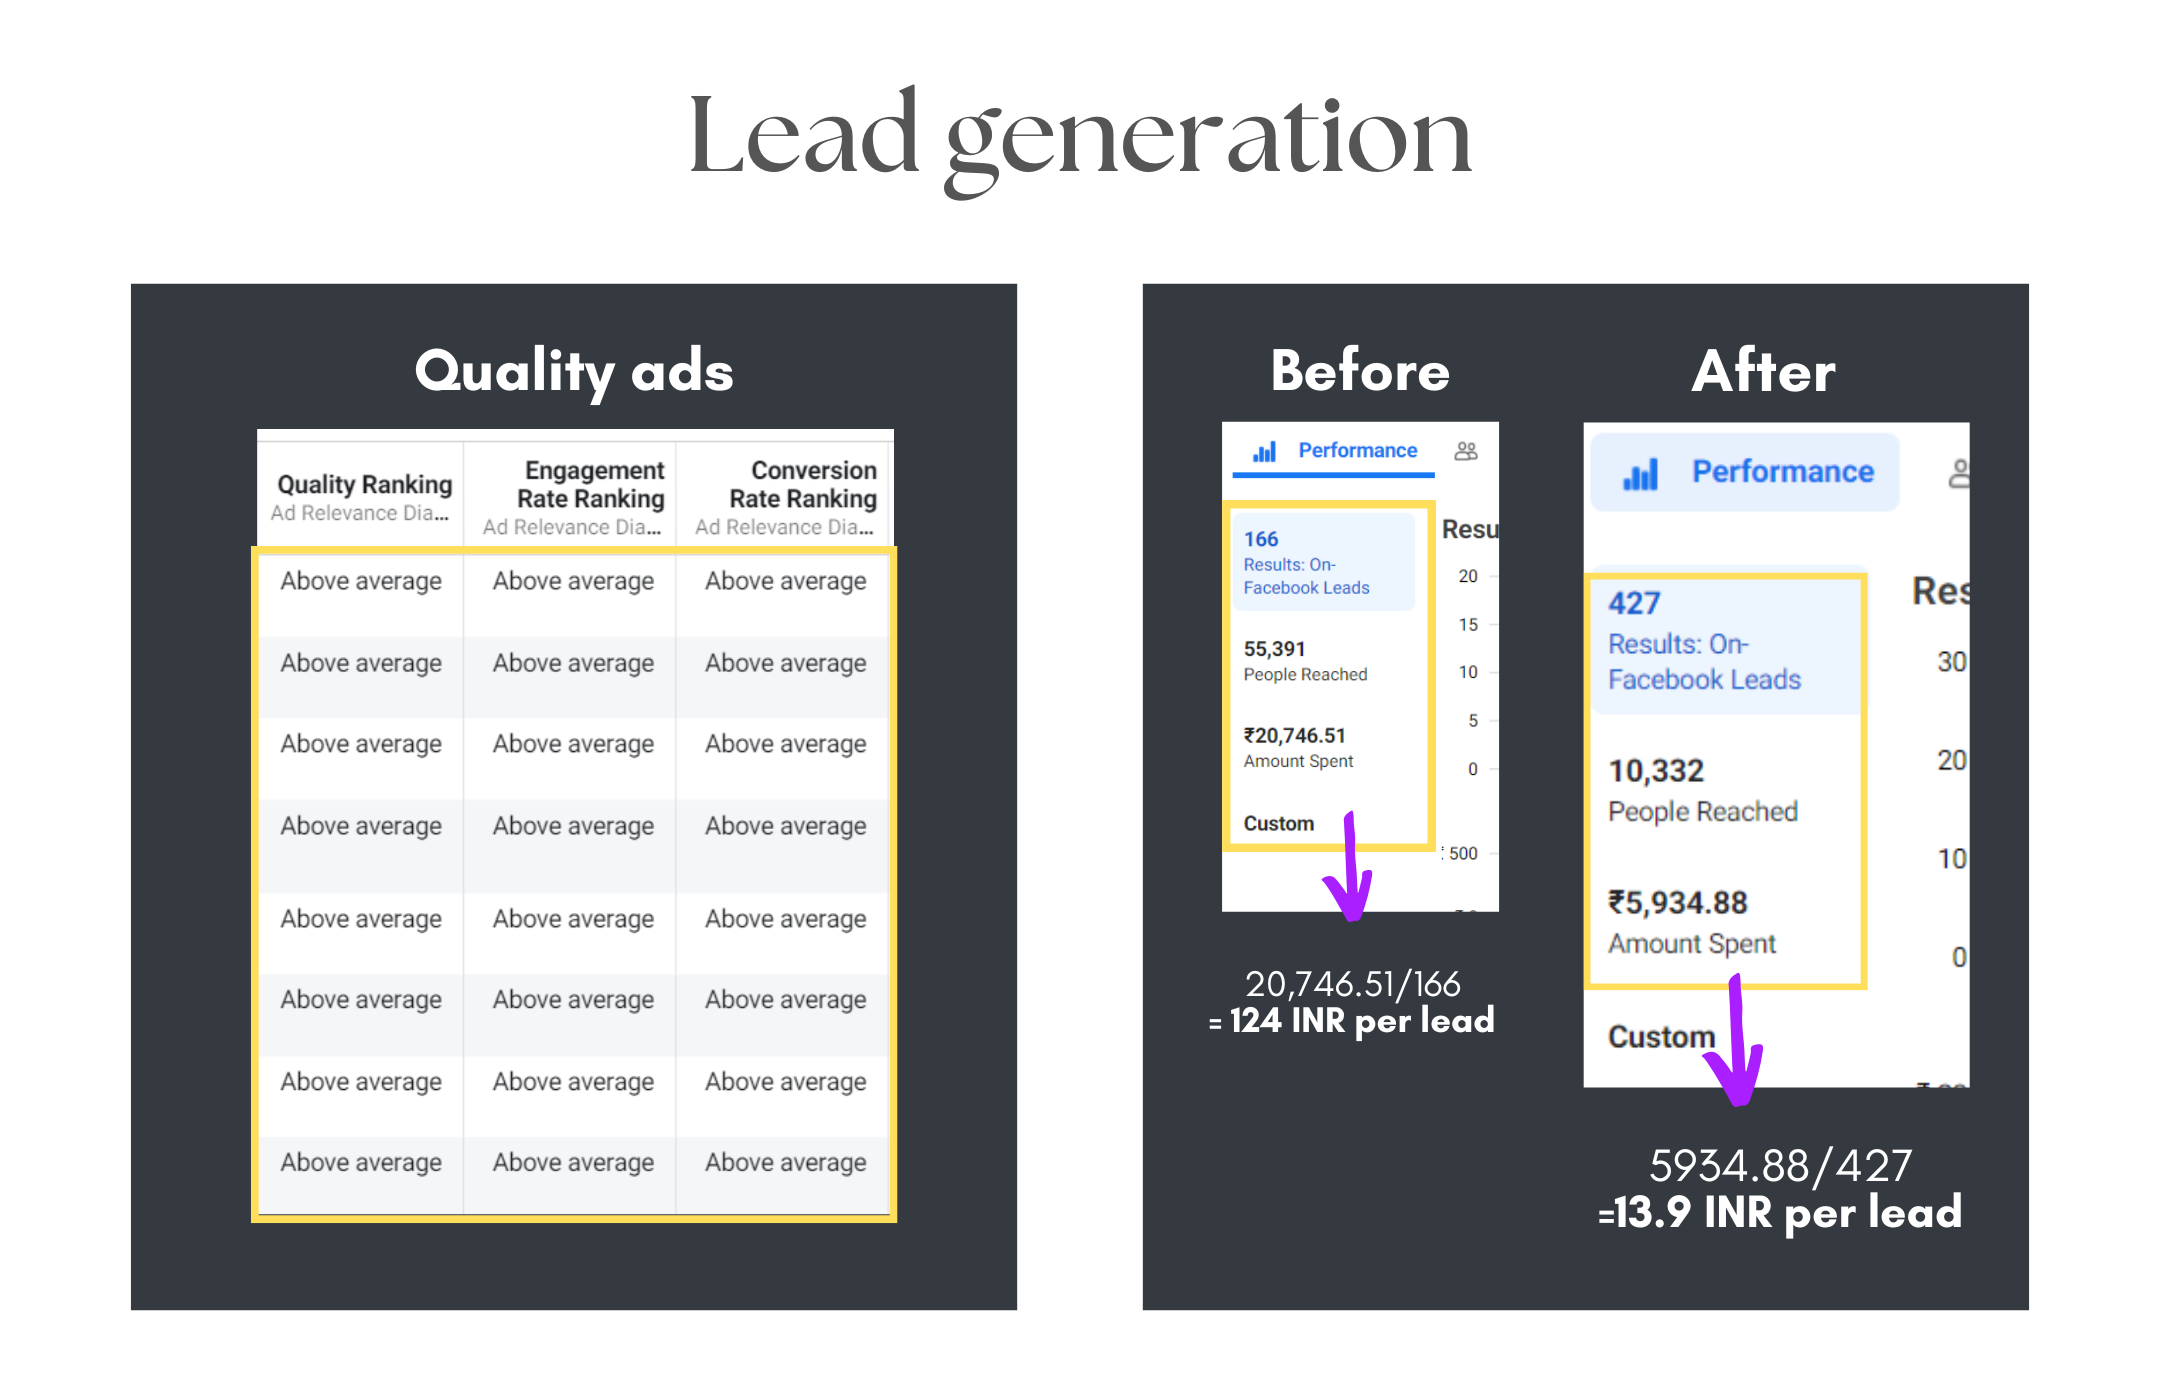 Lead generation results